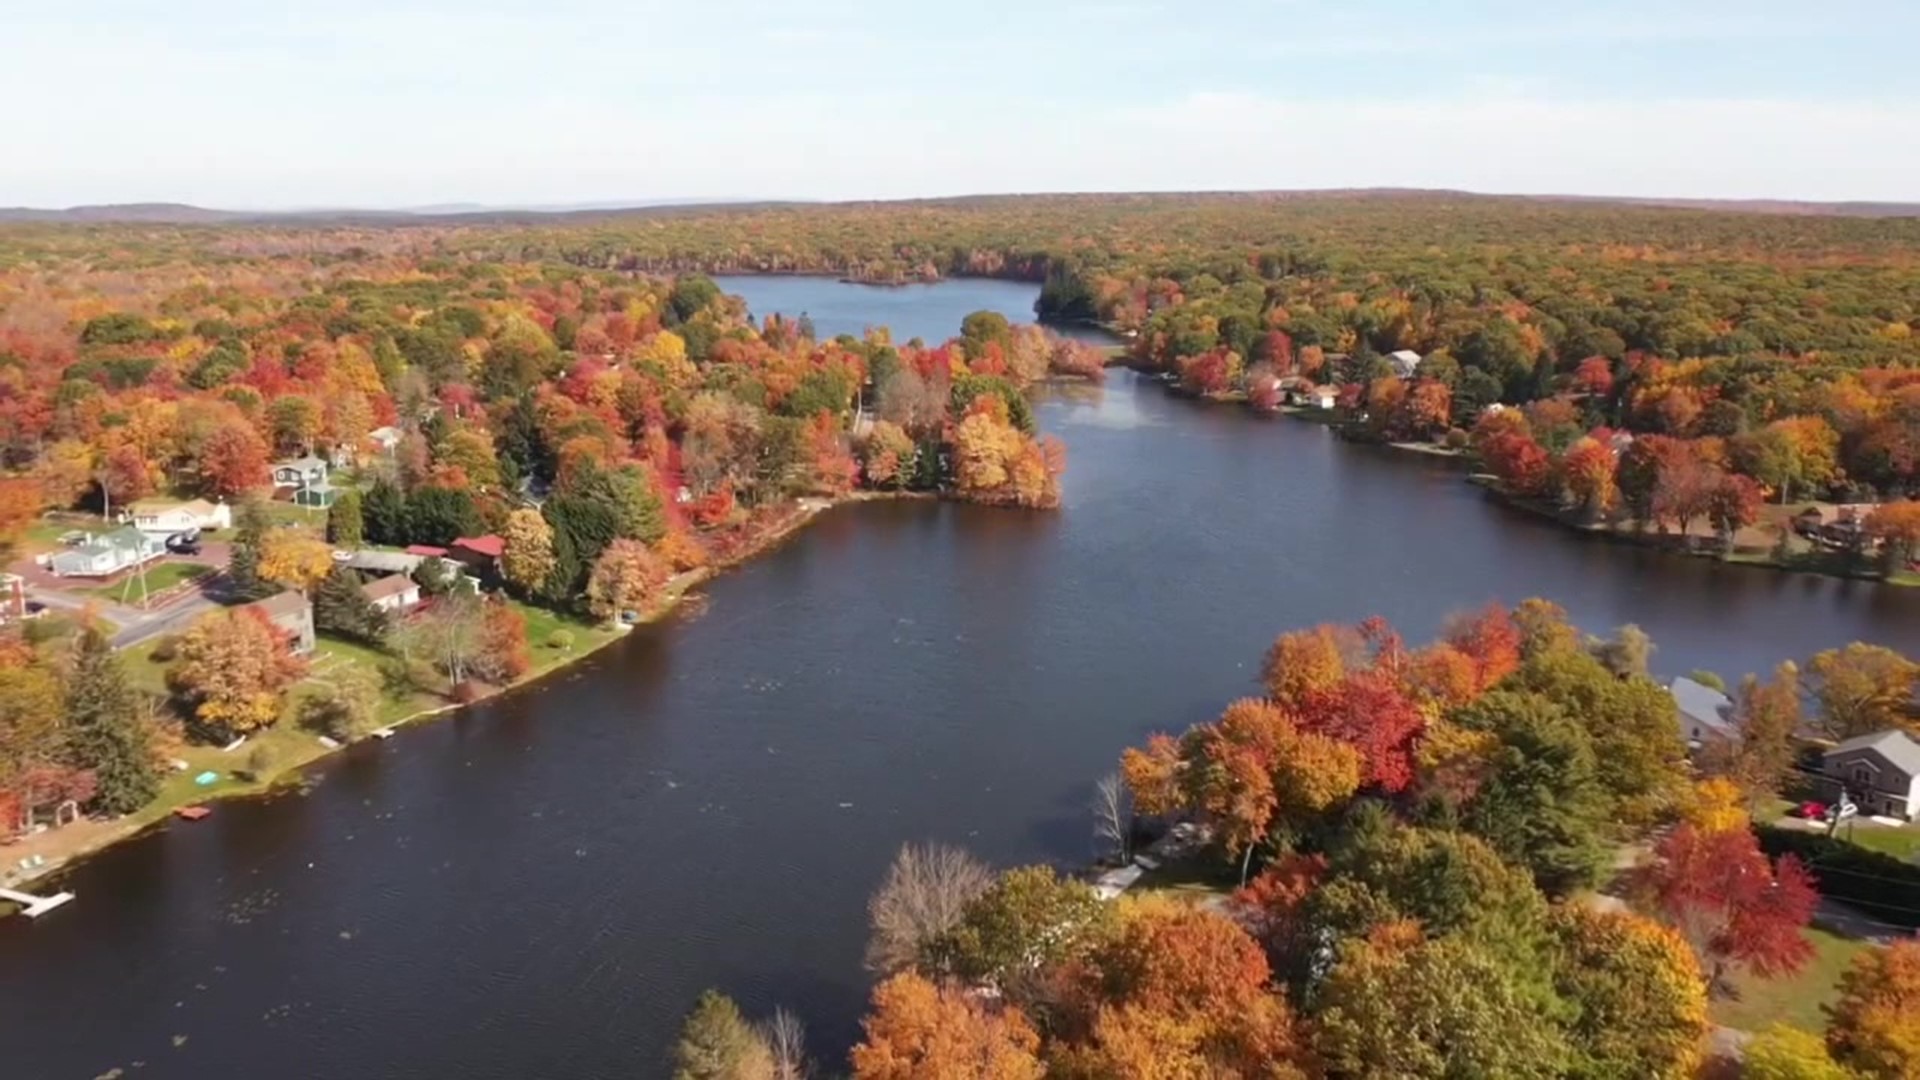 Tourism groups are gearing up for fall as leaf peepers head to the Poconos.